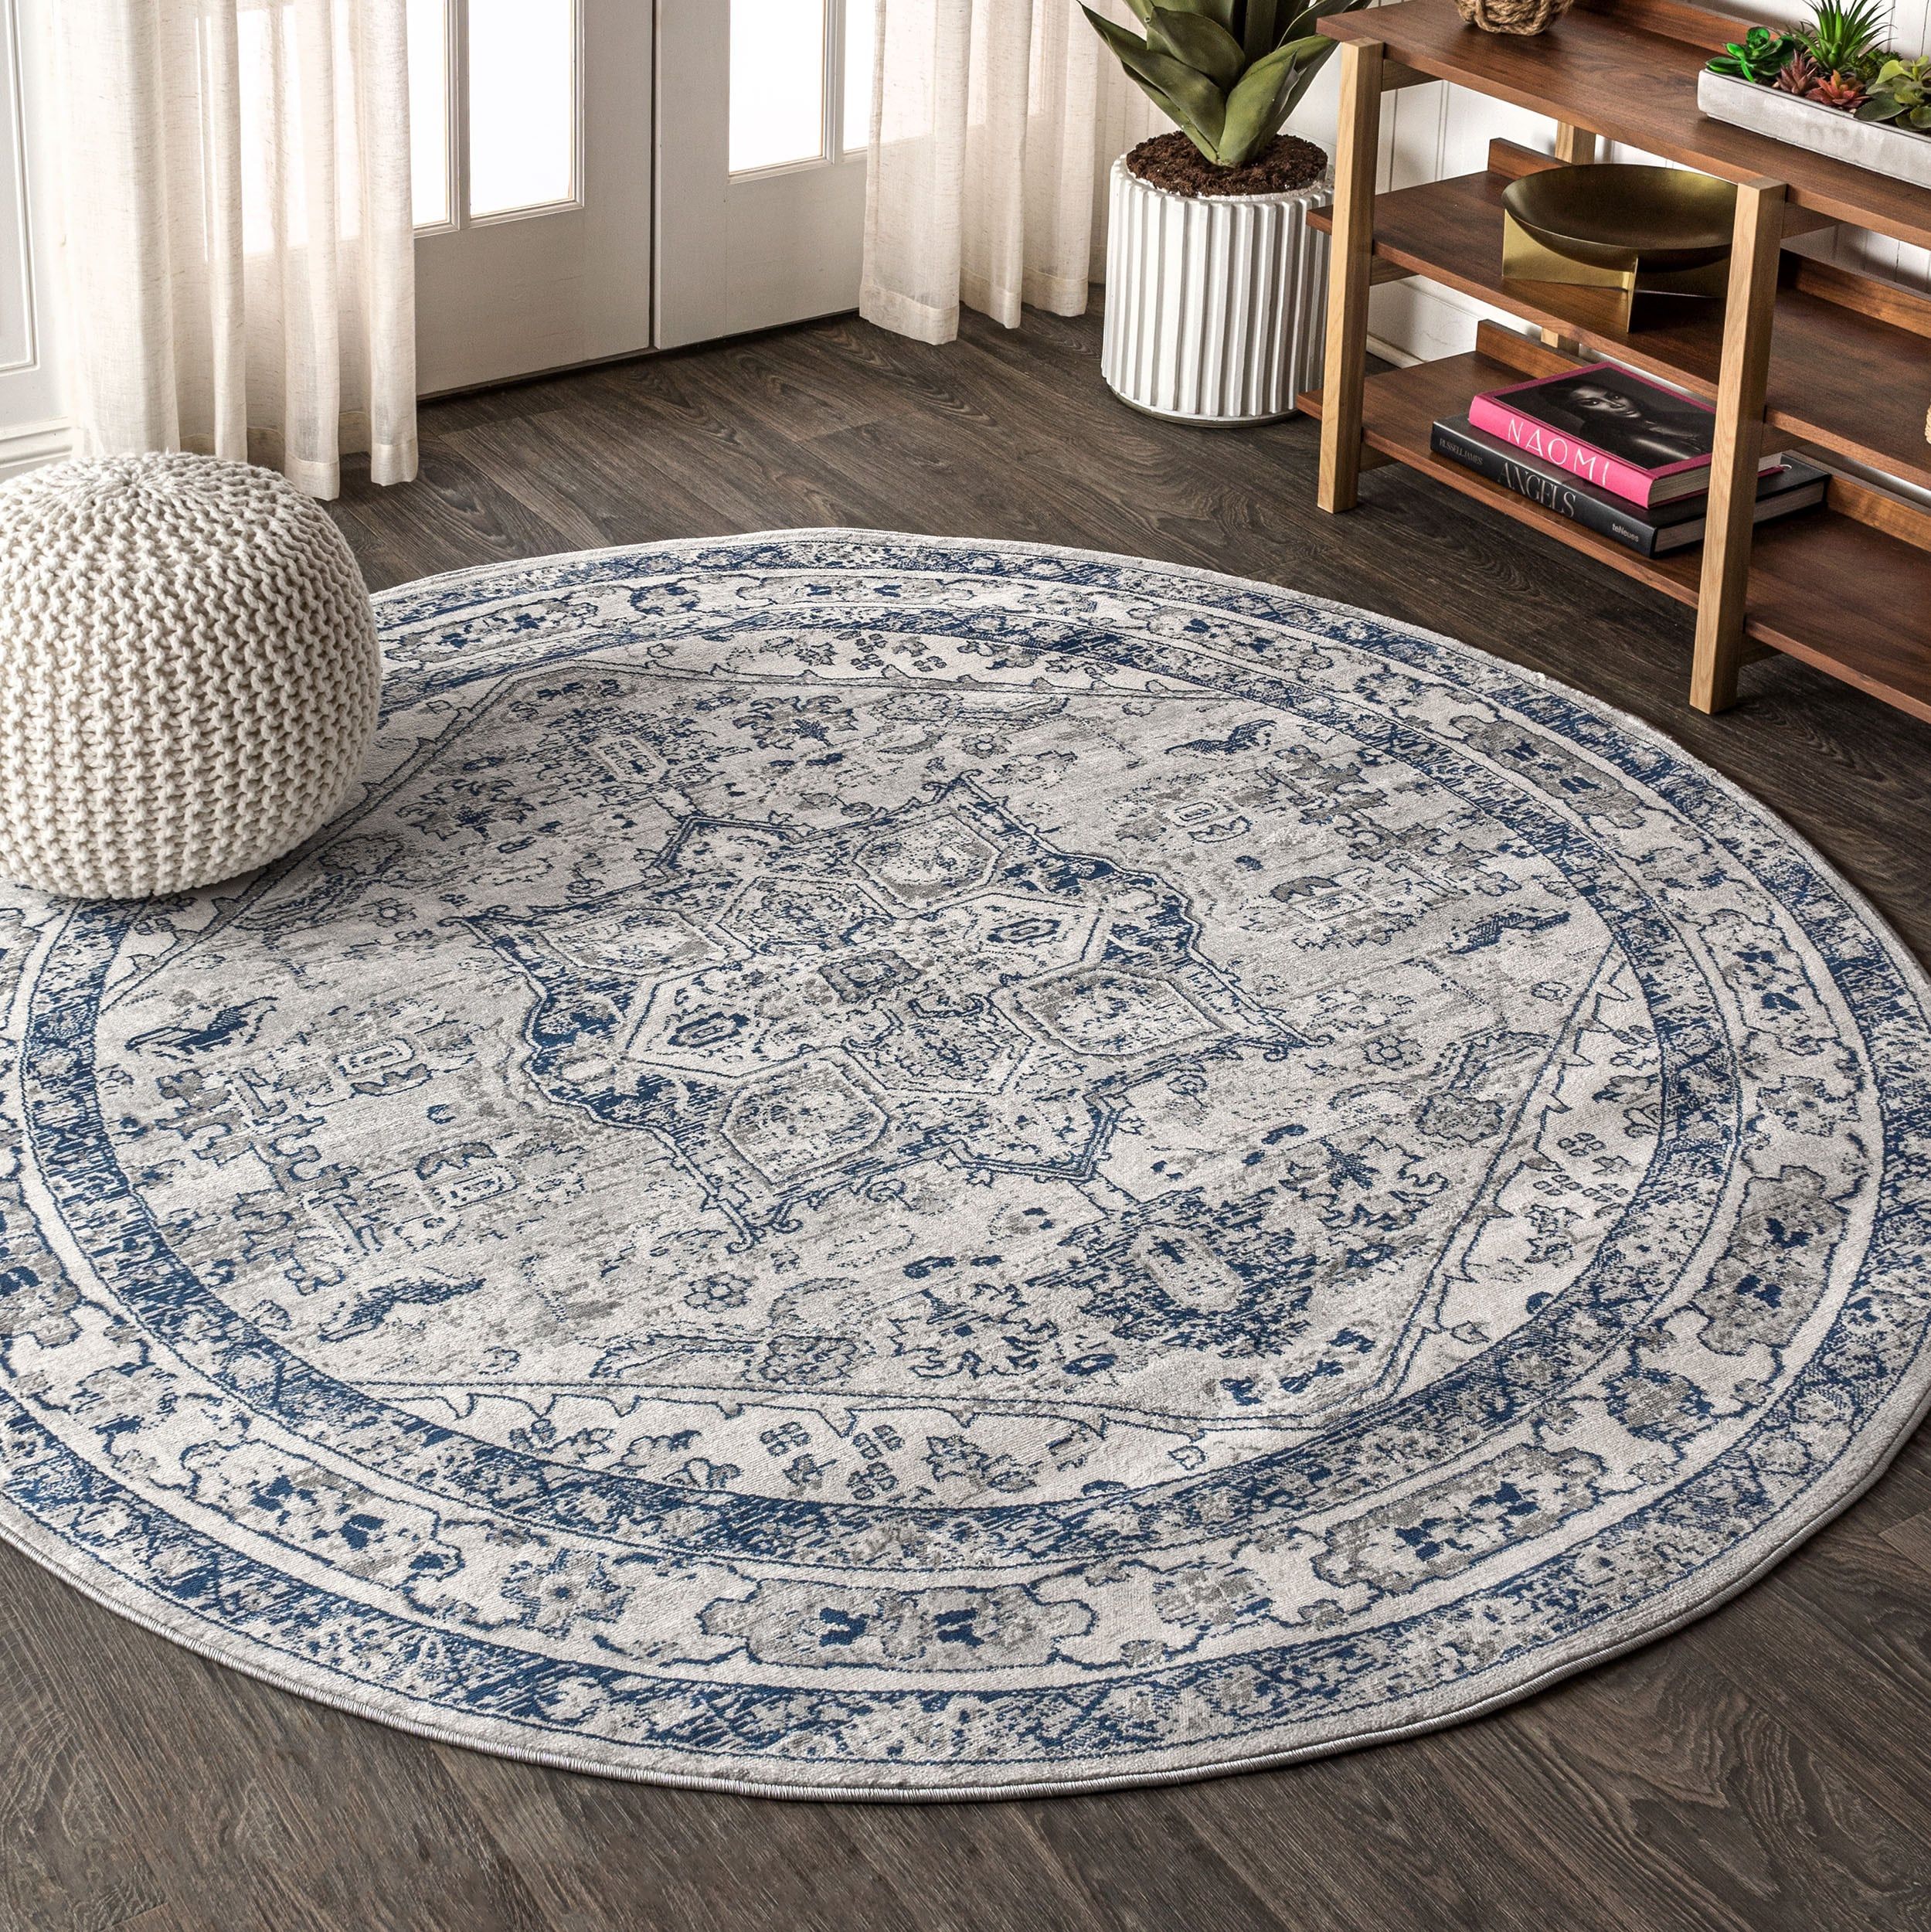 Jonathan Y 6 X 6 Light Grey/Navy Round Indoor Border Oriental Area Rug In  The Rugs Department At Lowes With Regard To Border Round Rugs (View 7 of 15)